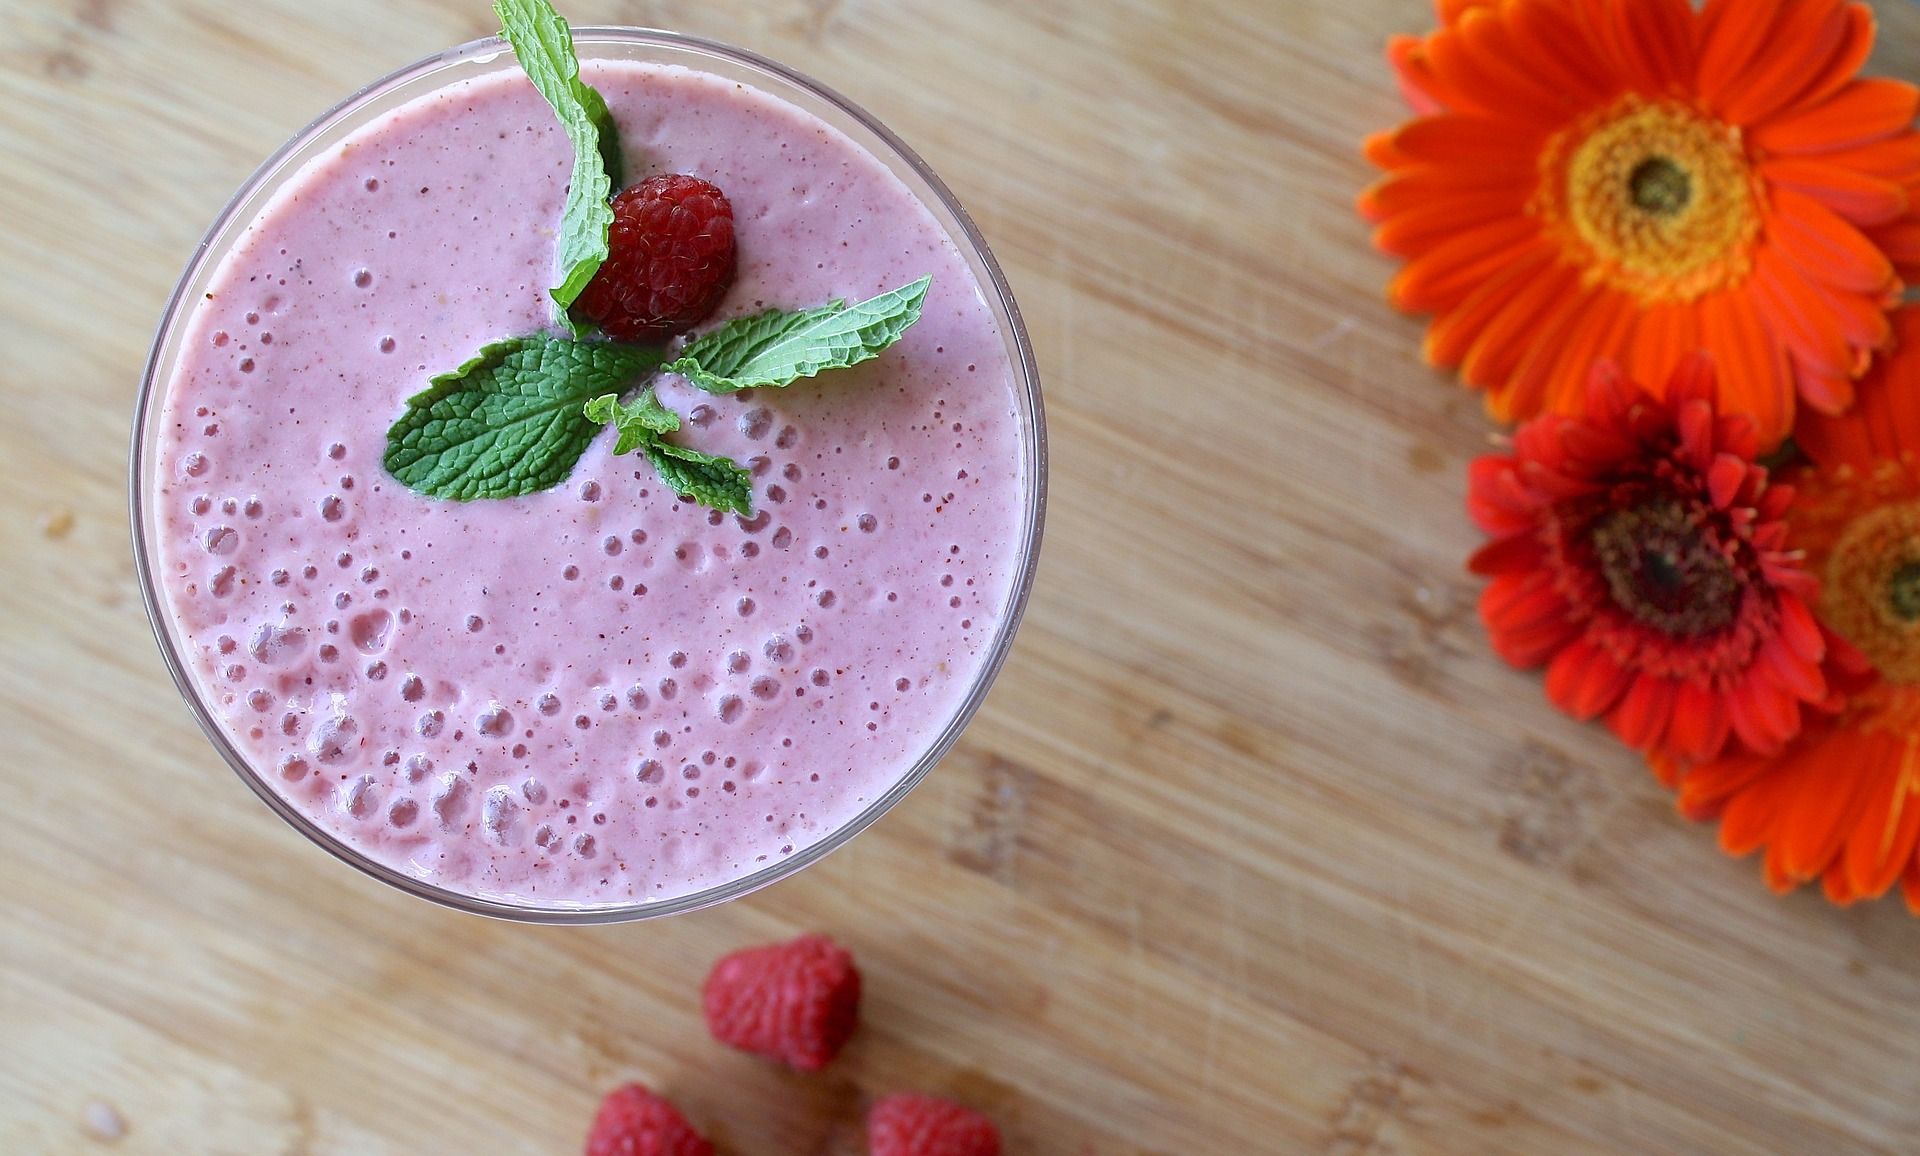 A fan of smoothies? Blend a handful of spinach or kale into your favorite recipe for a quick serving or two of vegetables.